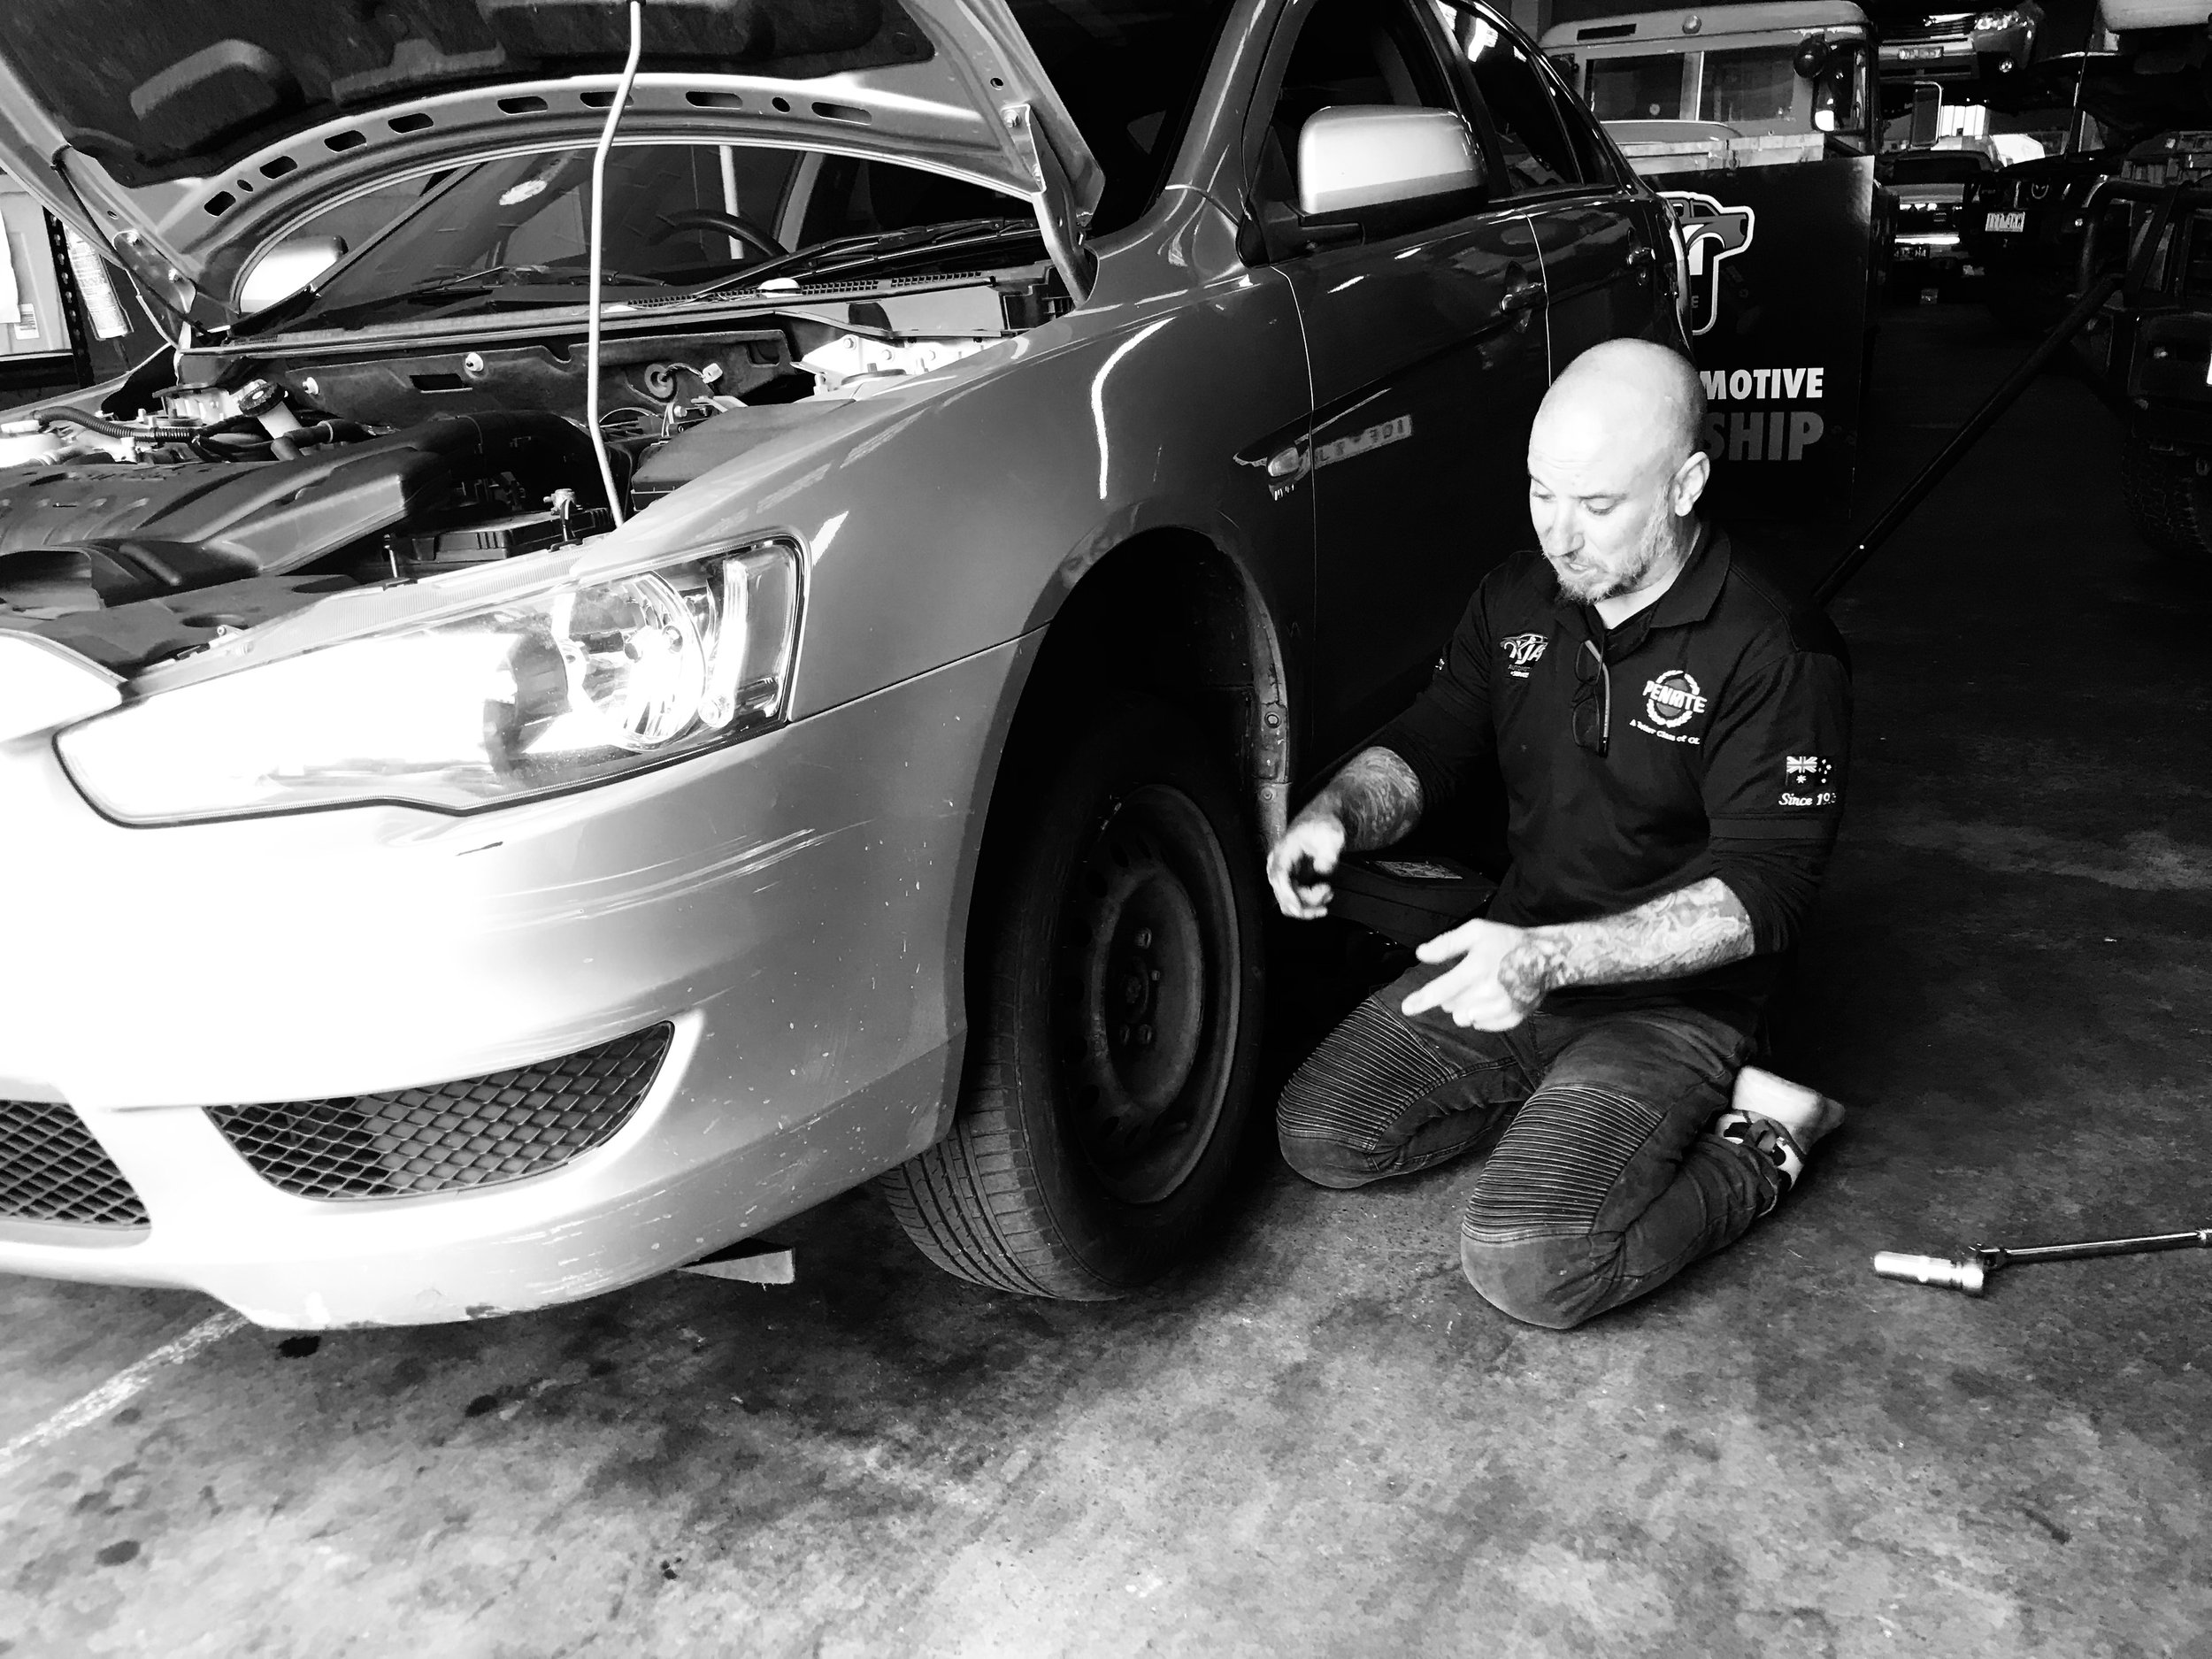 Kristian giving us the tips and tricks for changing a car tyre.